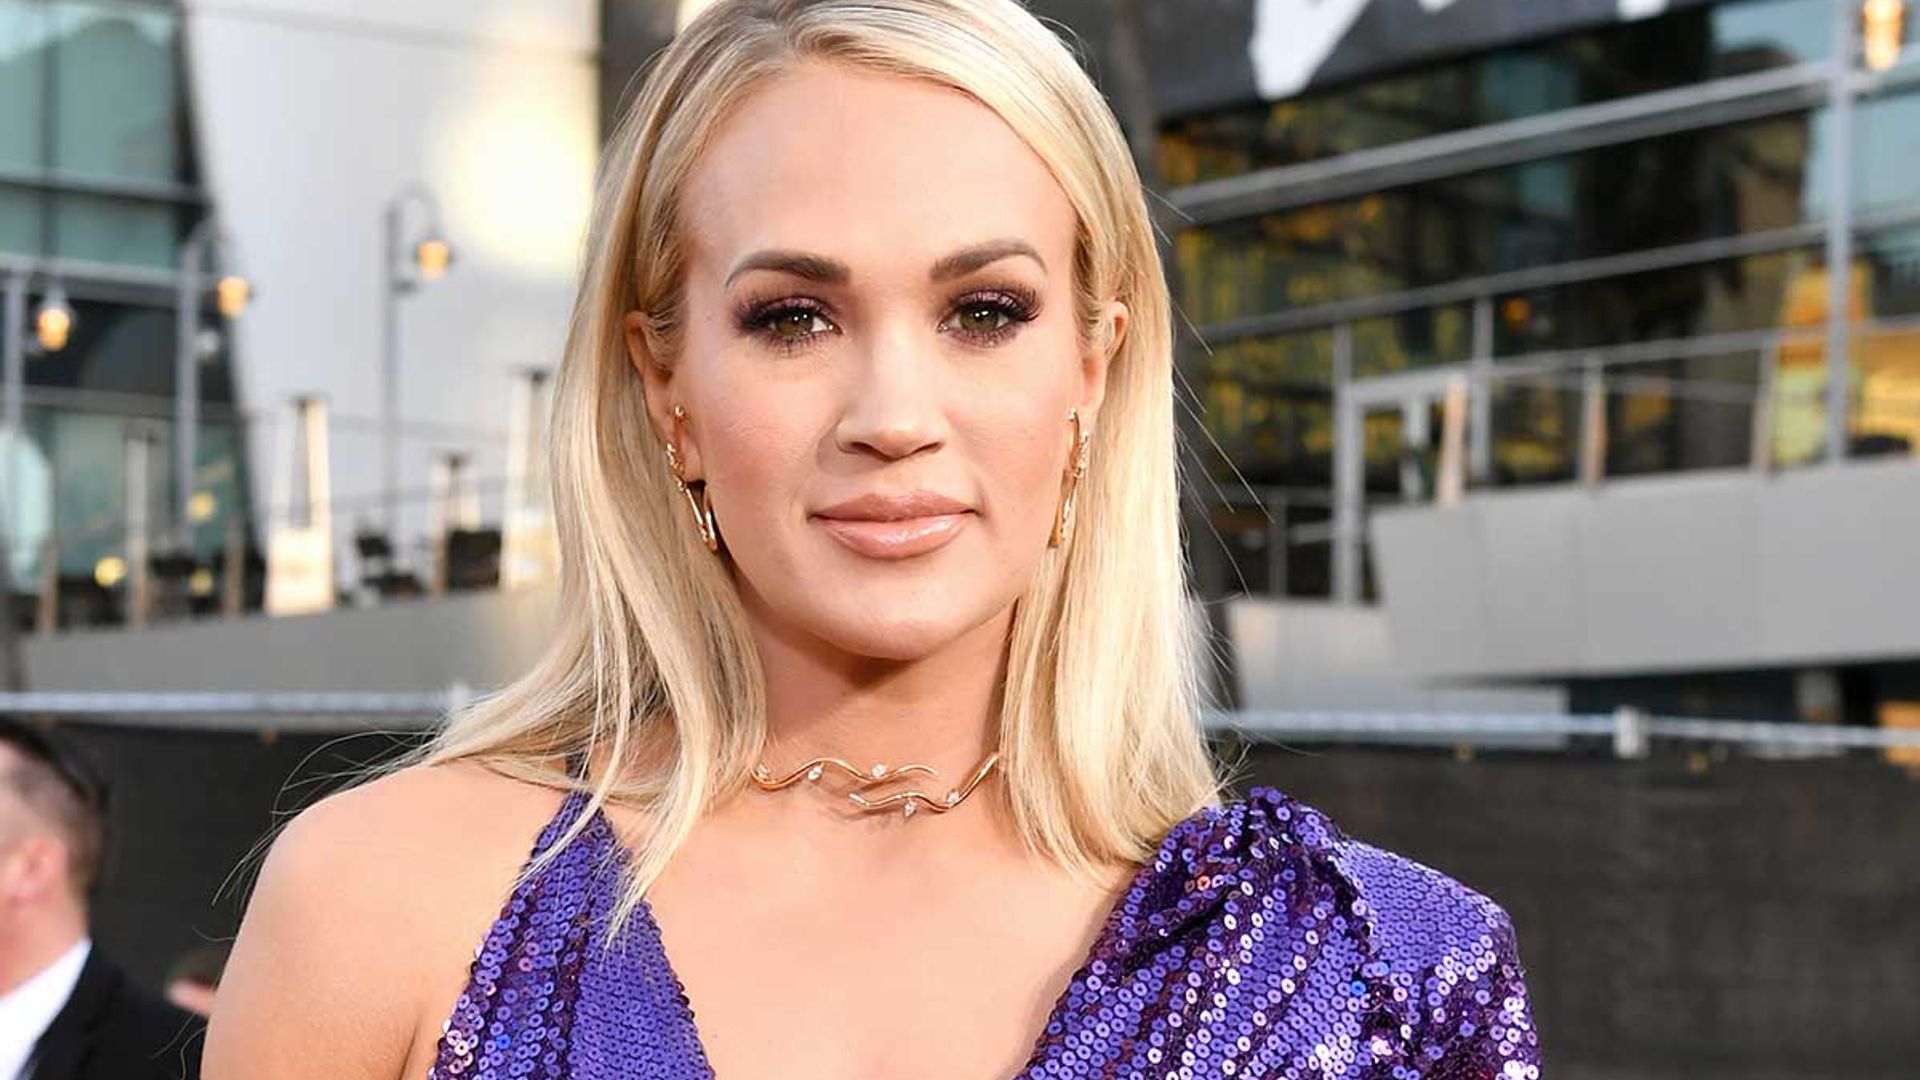 Carrie Underwood heading out on Denim & Rhinestones Tour with